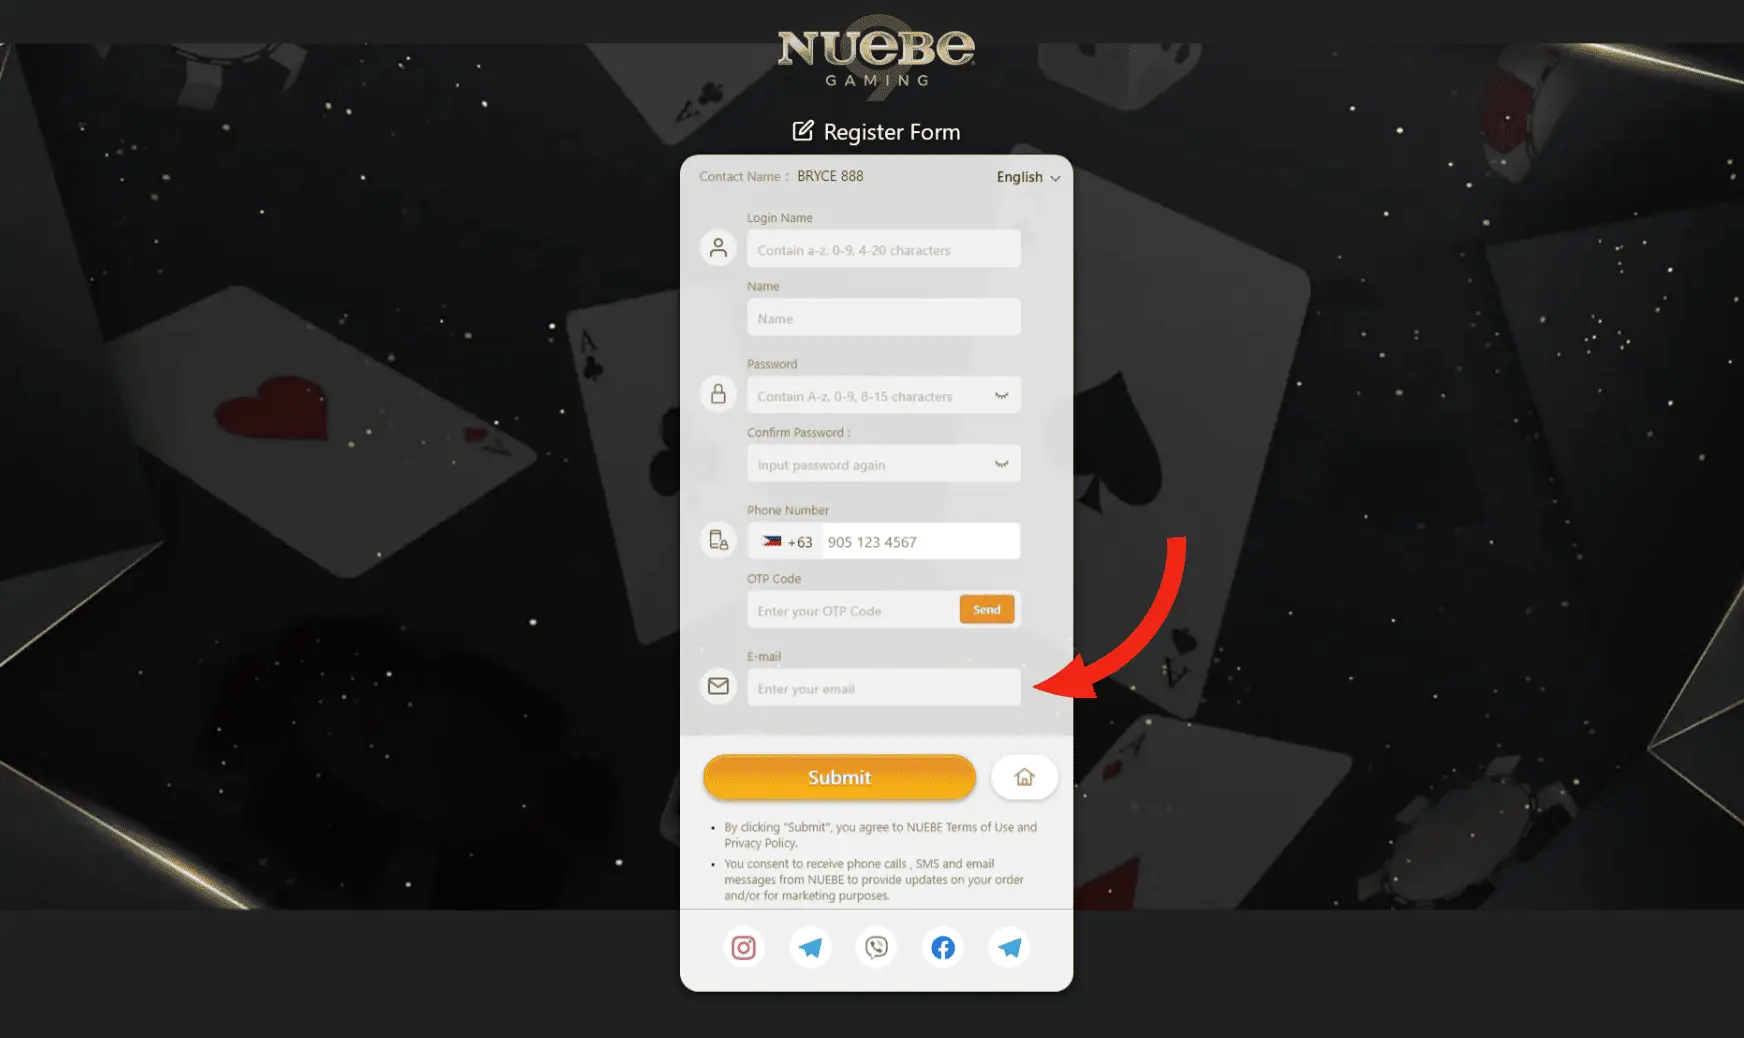 The registration form on Nuebe Gaming's website with a focus on the 'Email' field, crucial for account recovery and password reset.